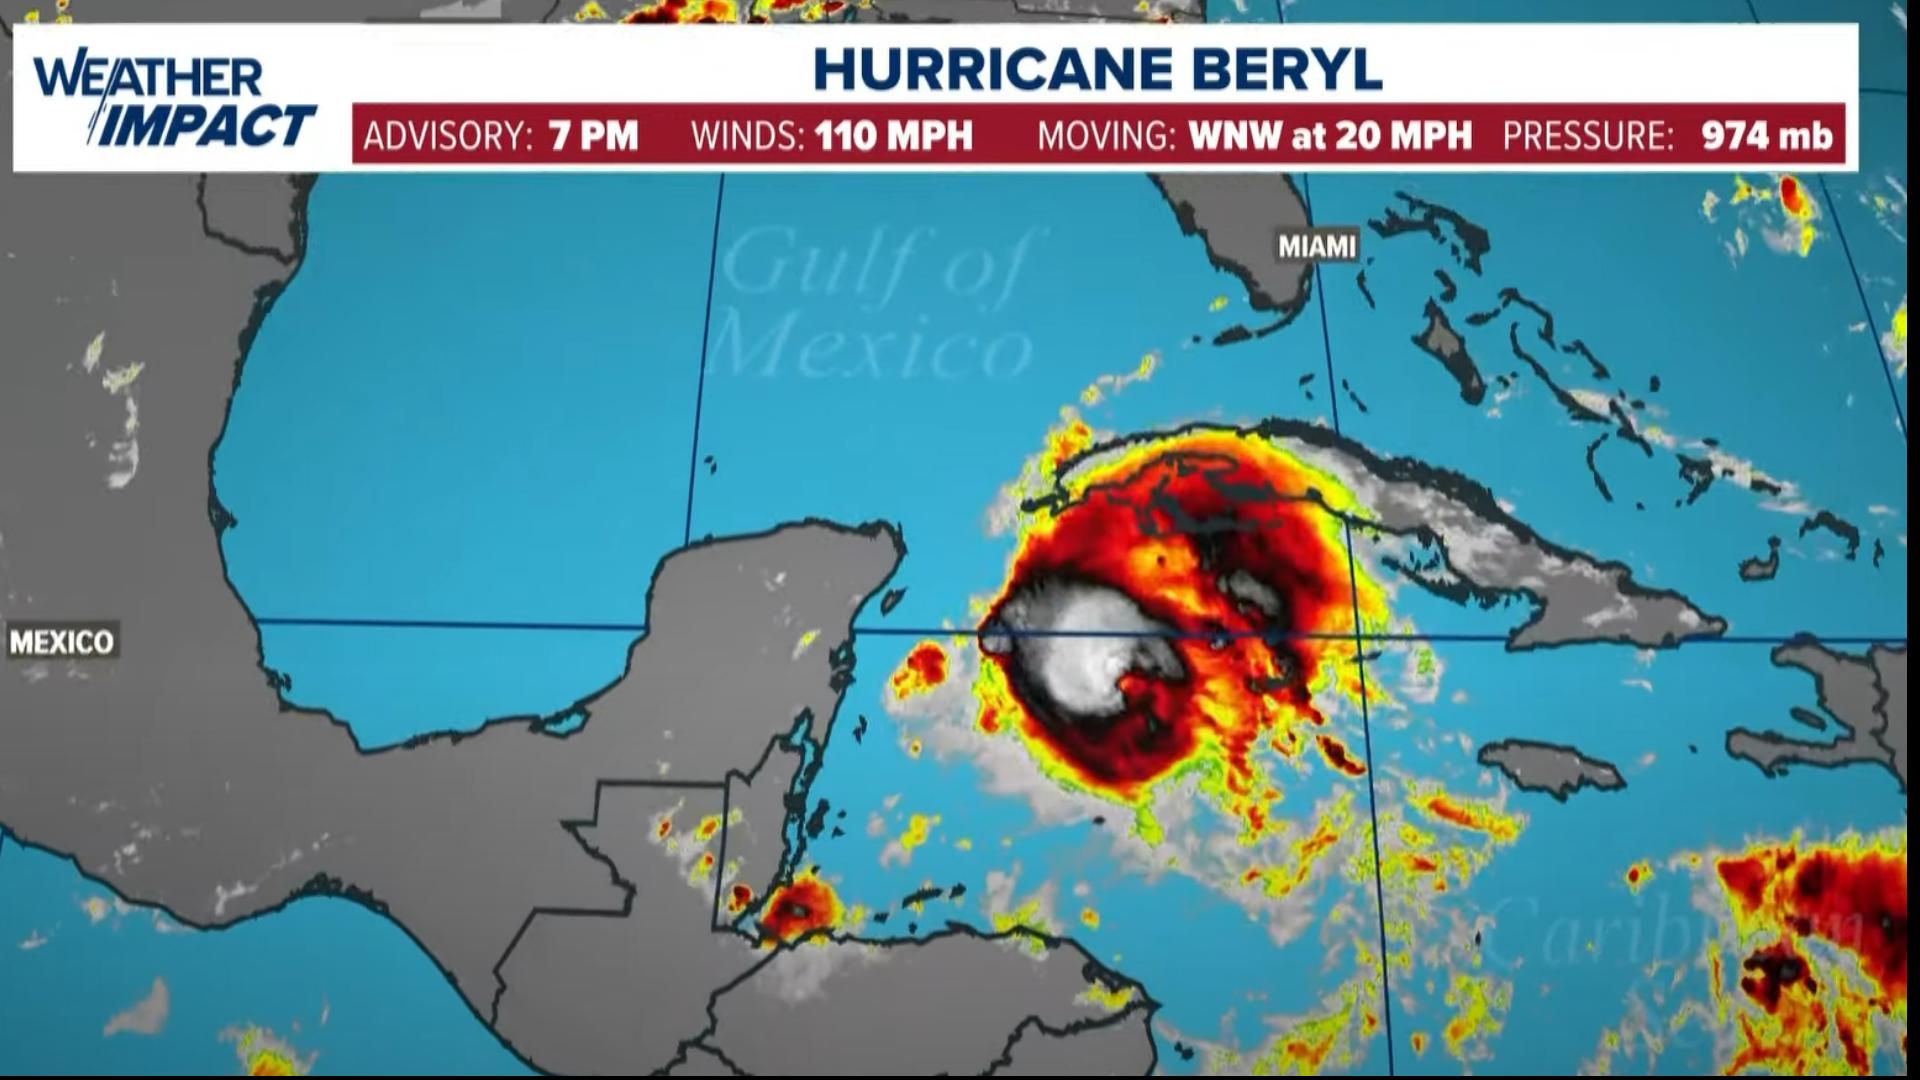 KHOU 11 Chief Meteorologist David Paul has the latest on Hurricane Beryl, which is heading toward Mexican destinations along the coast of the Yucatan Peninsula.